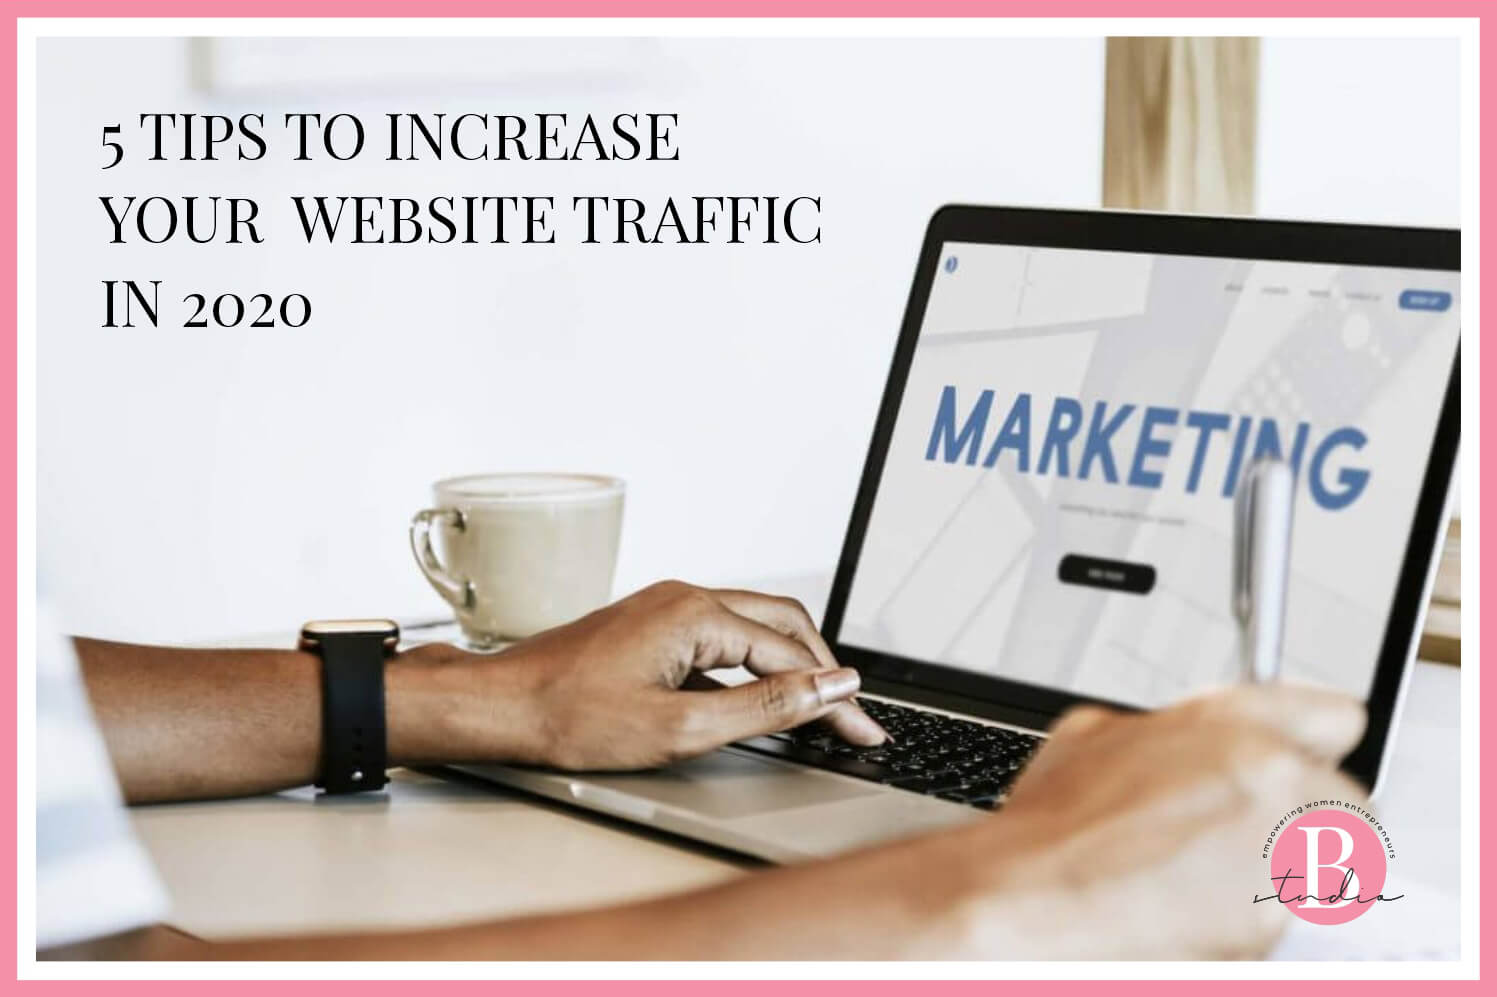 5 Tips To Increase Your Website Traffic In 2020 img